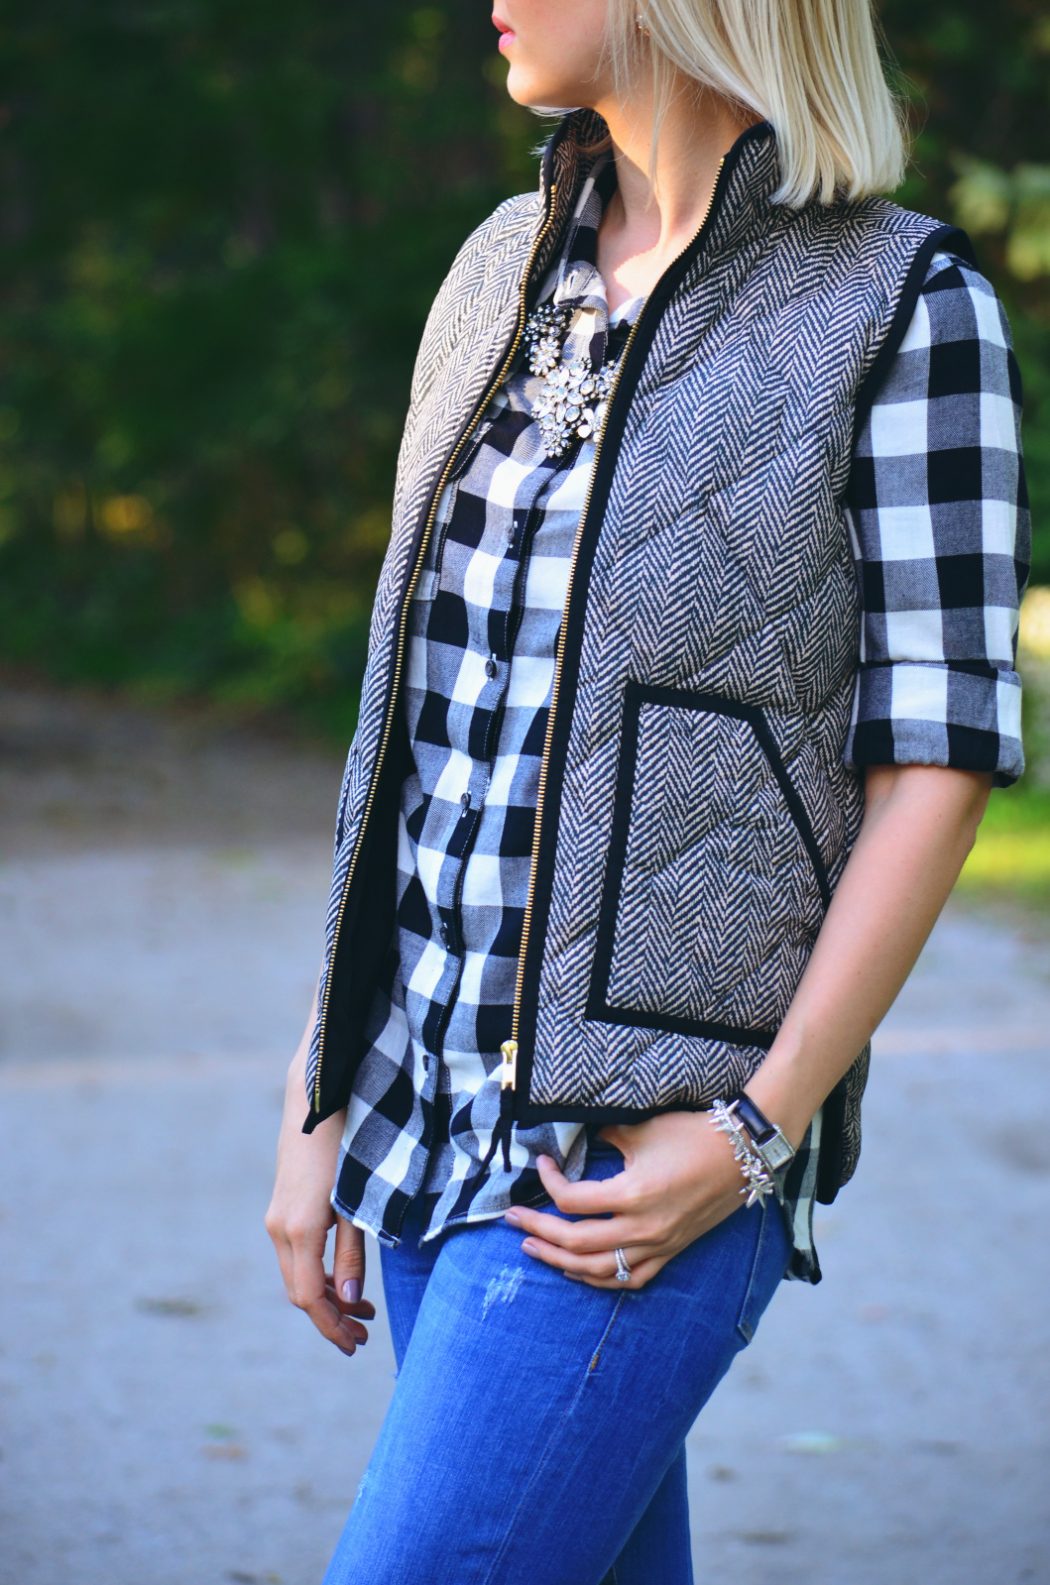 Puffy-vest3 8 Main Winter & Fall Jackets & Coats Trends in 2020